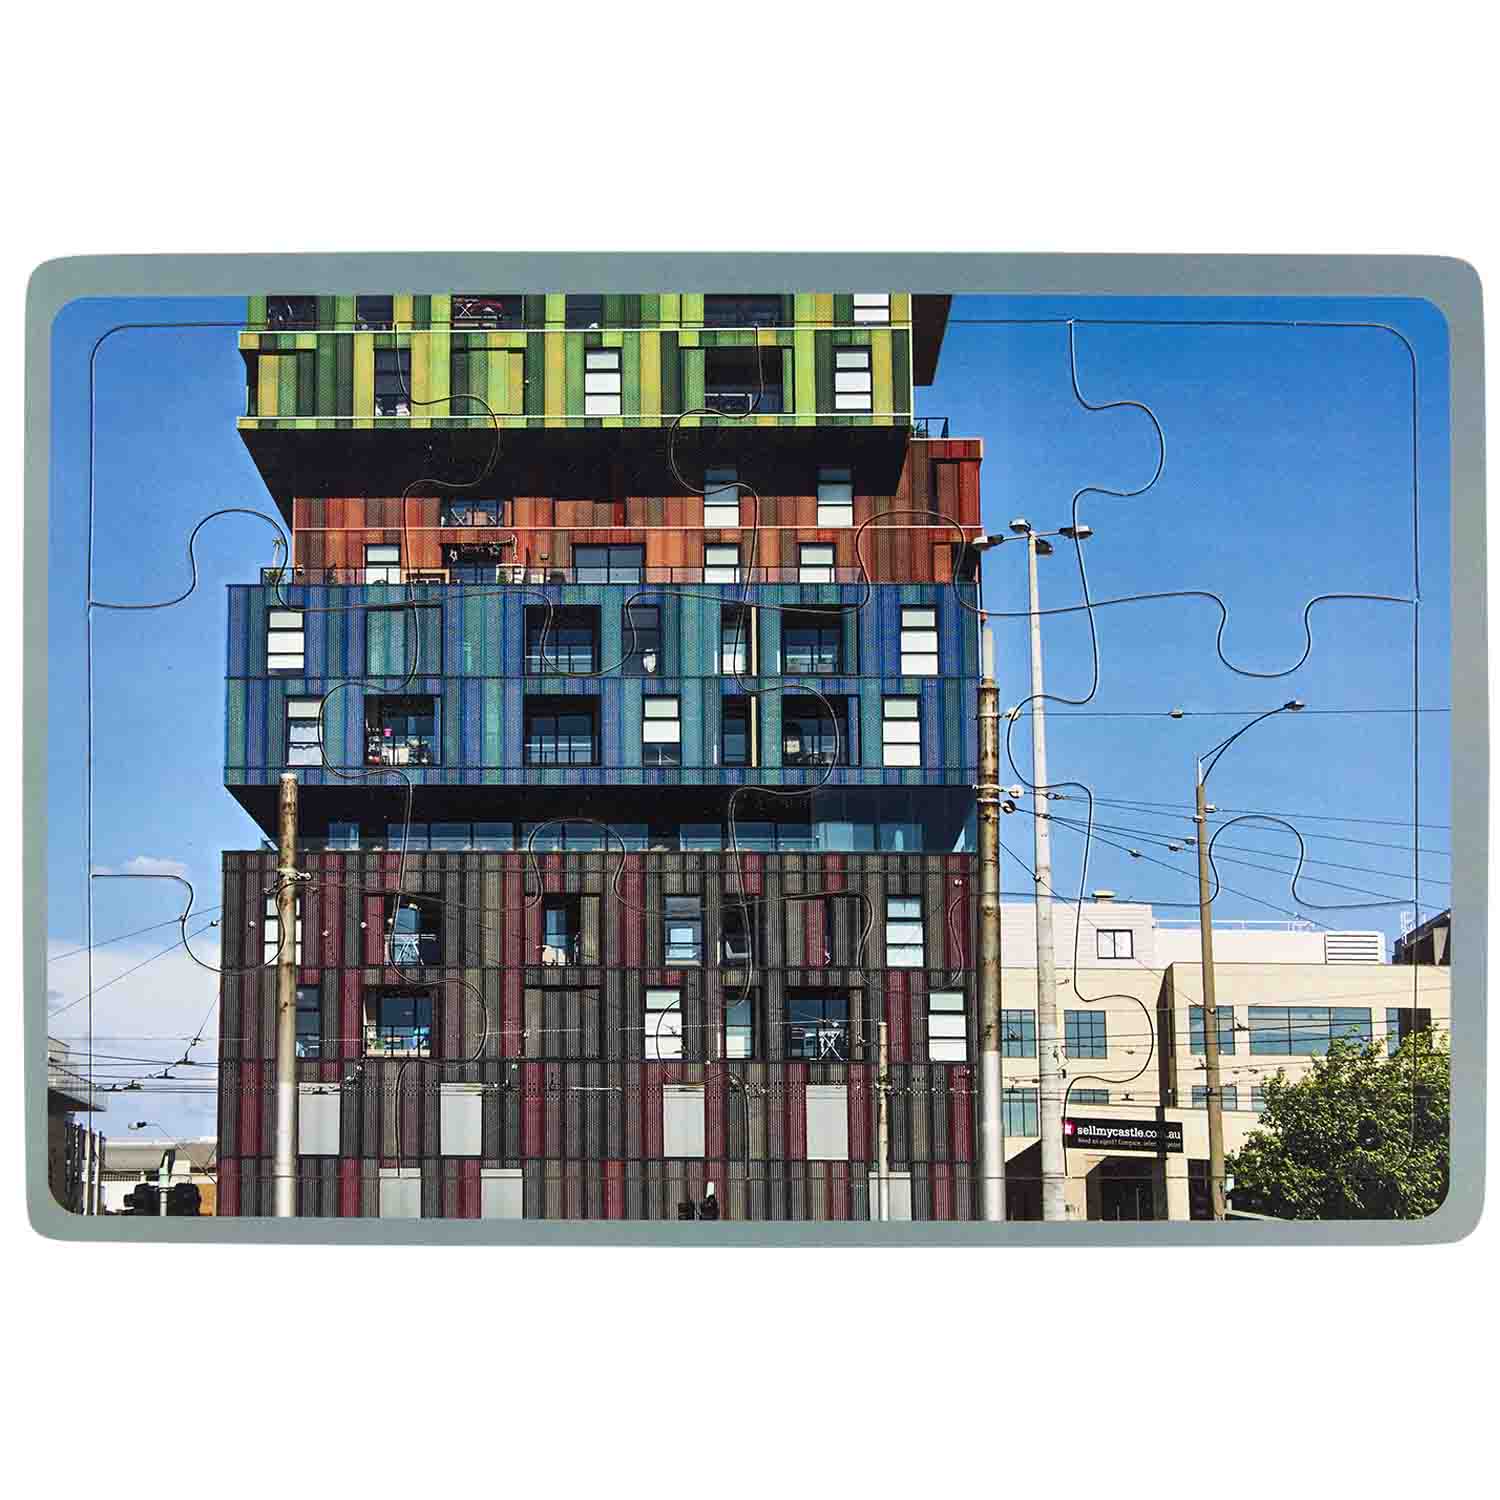 Becker's Building Inspirations 12-Piece Puzzles, Set of 6